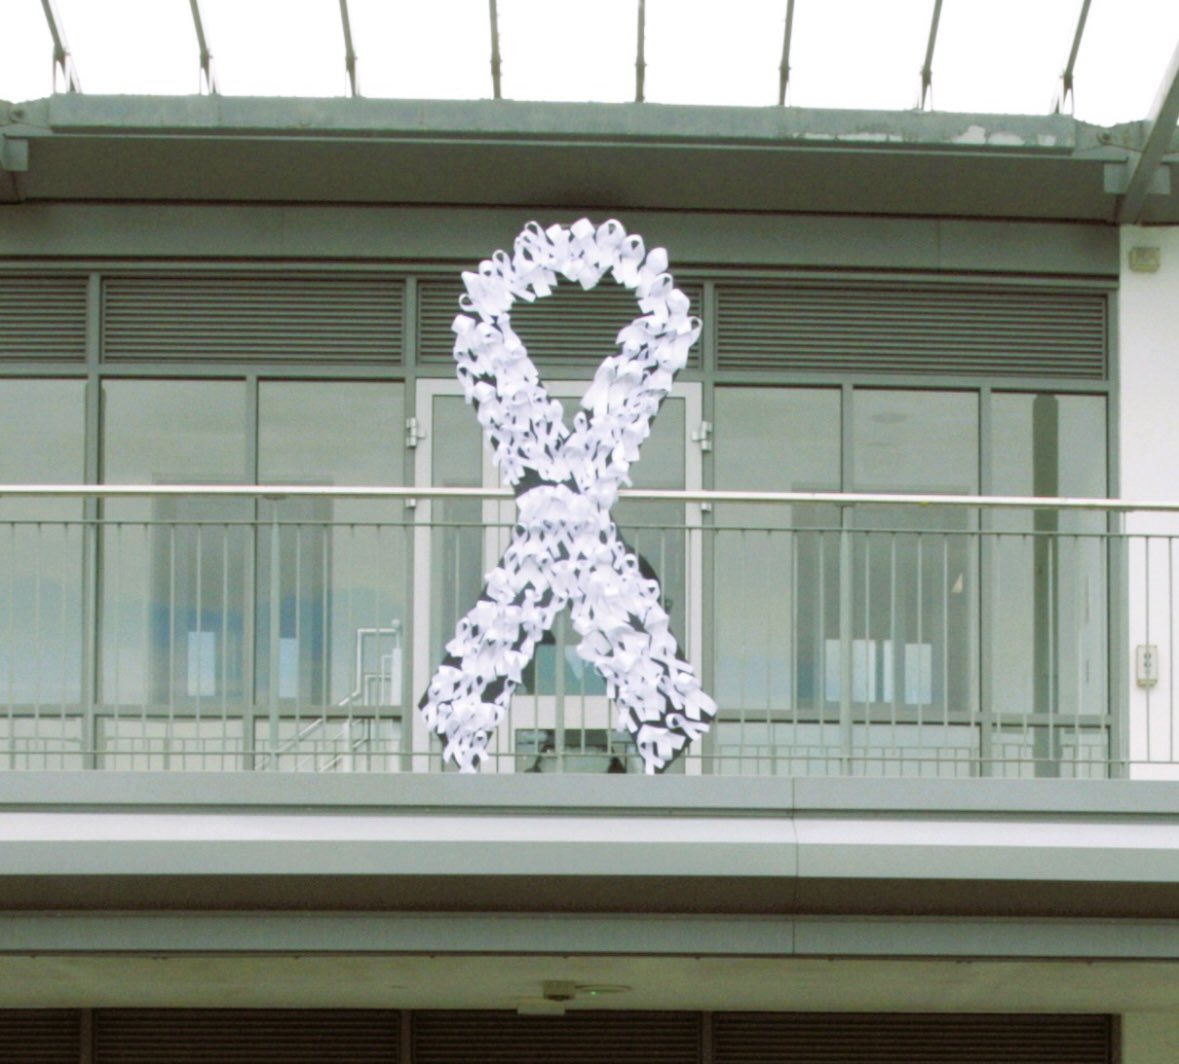 Promises, powerful stories and positive action in River House today. Over 50 at an event raising awareness of the inequities faced by women and girls. Commitments to end violence and an ask to reflect, respect and call out harmful behaviors in others #whiteribbon @MaudsleyNHS